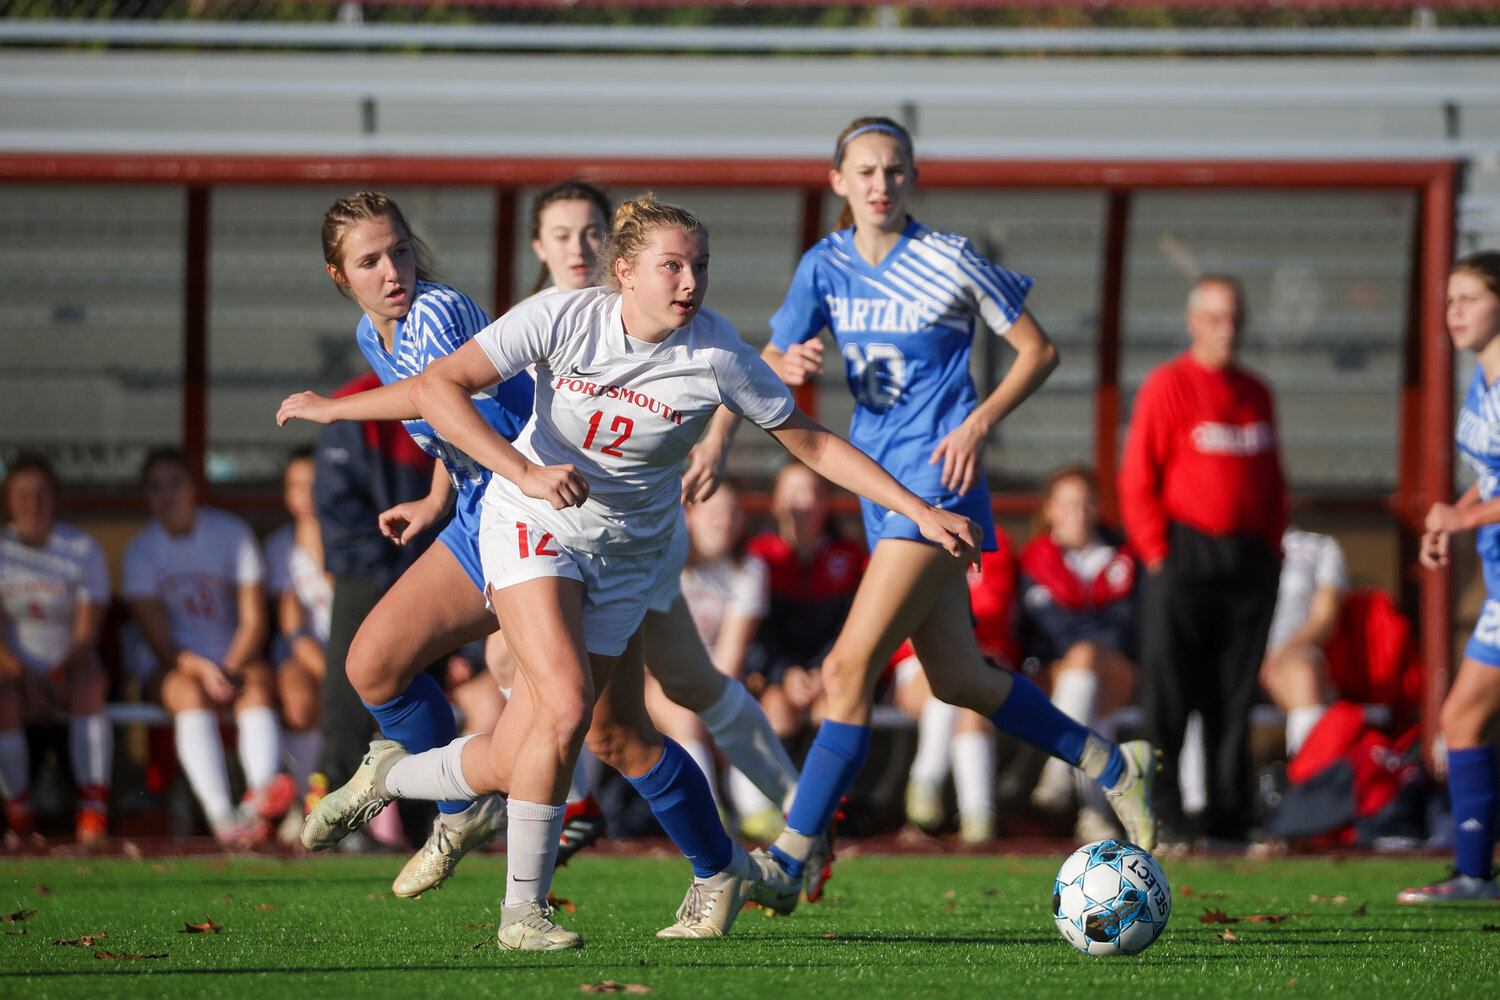 Mollyanne McGuire looks to get the ball to an open teammate upfield.